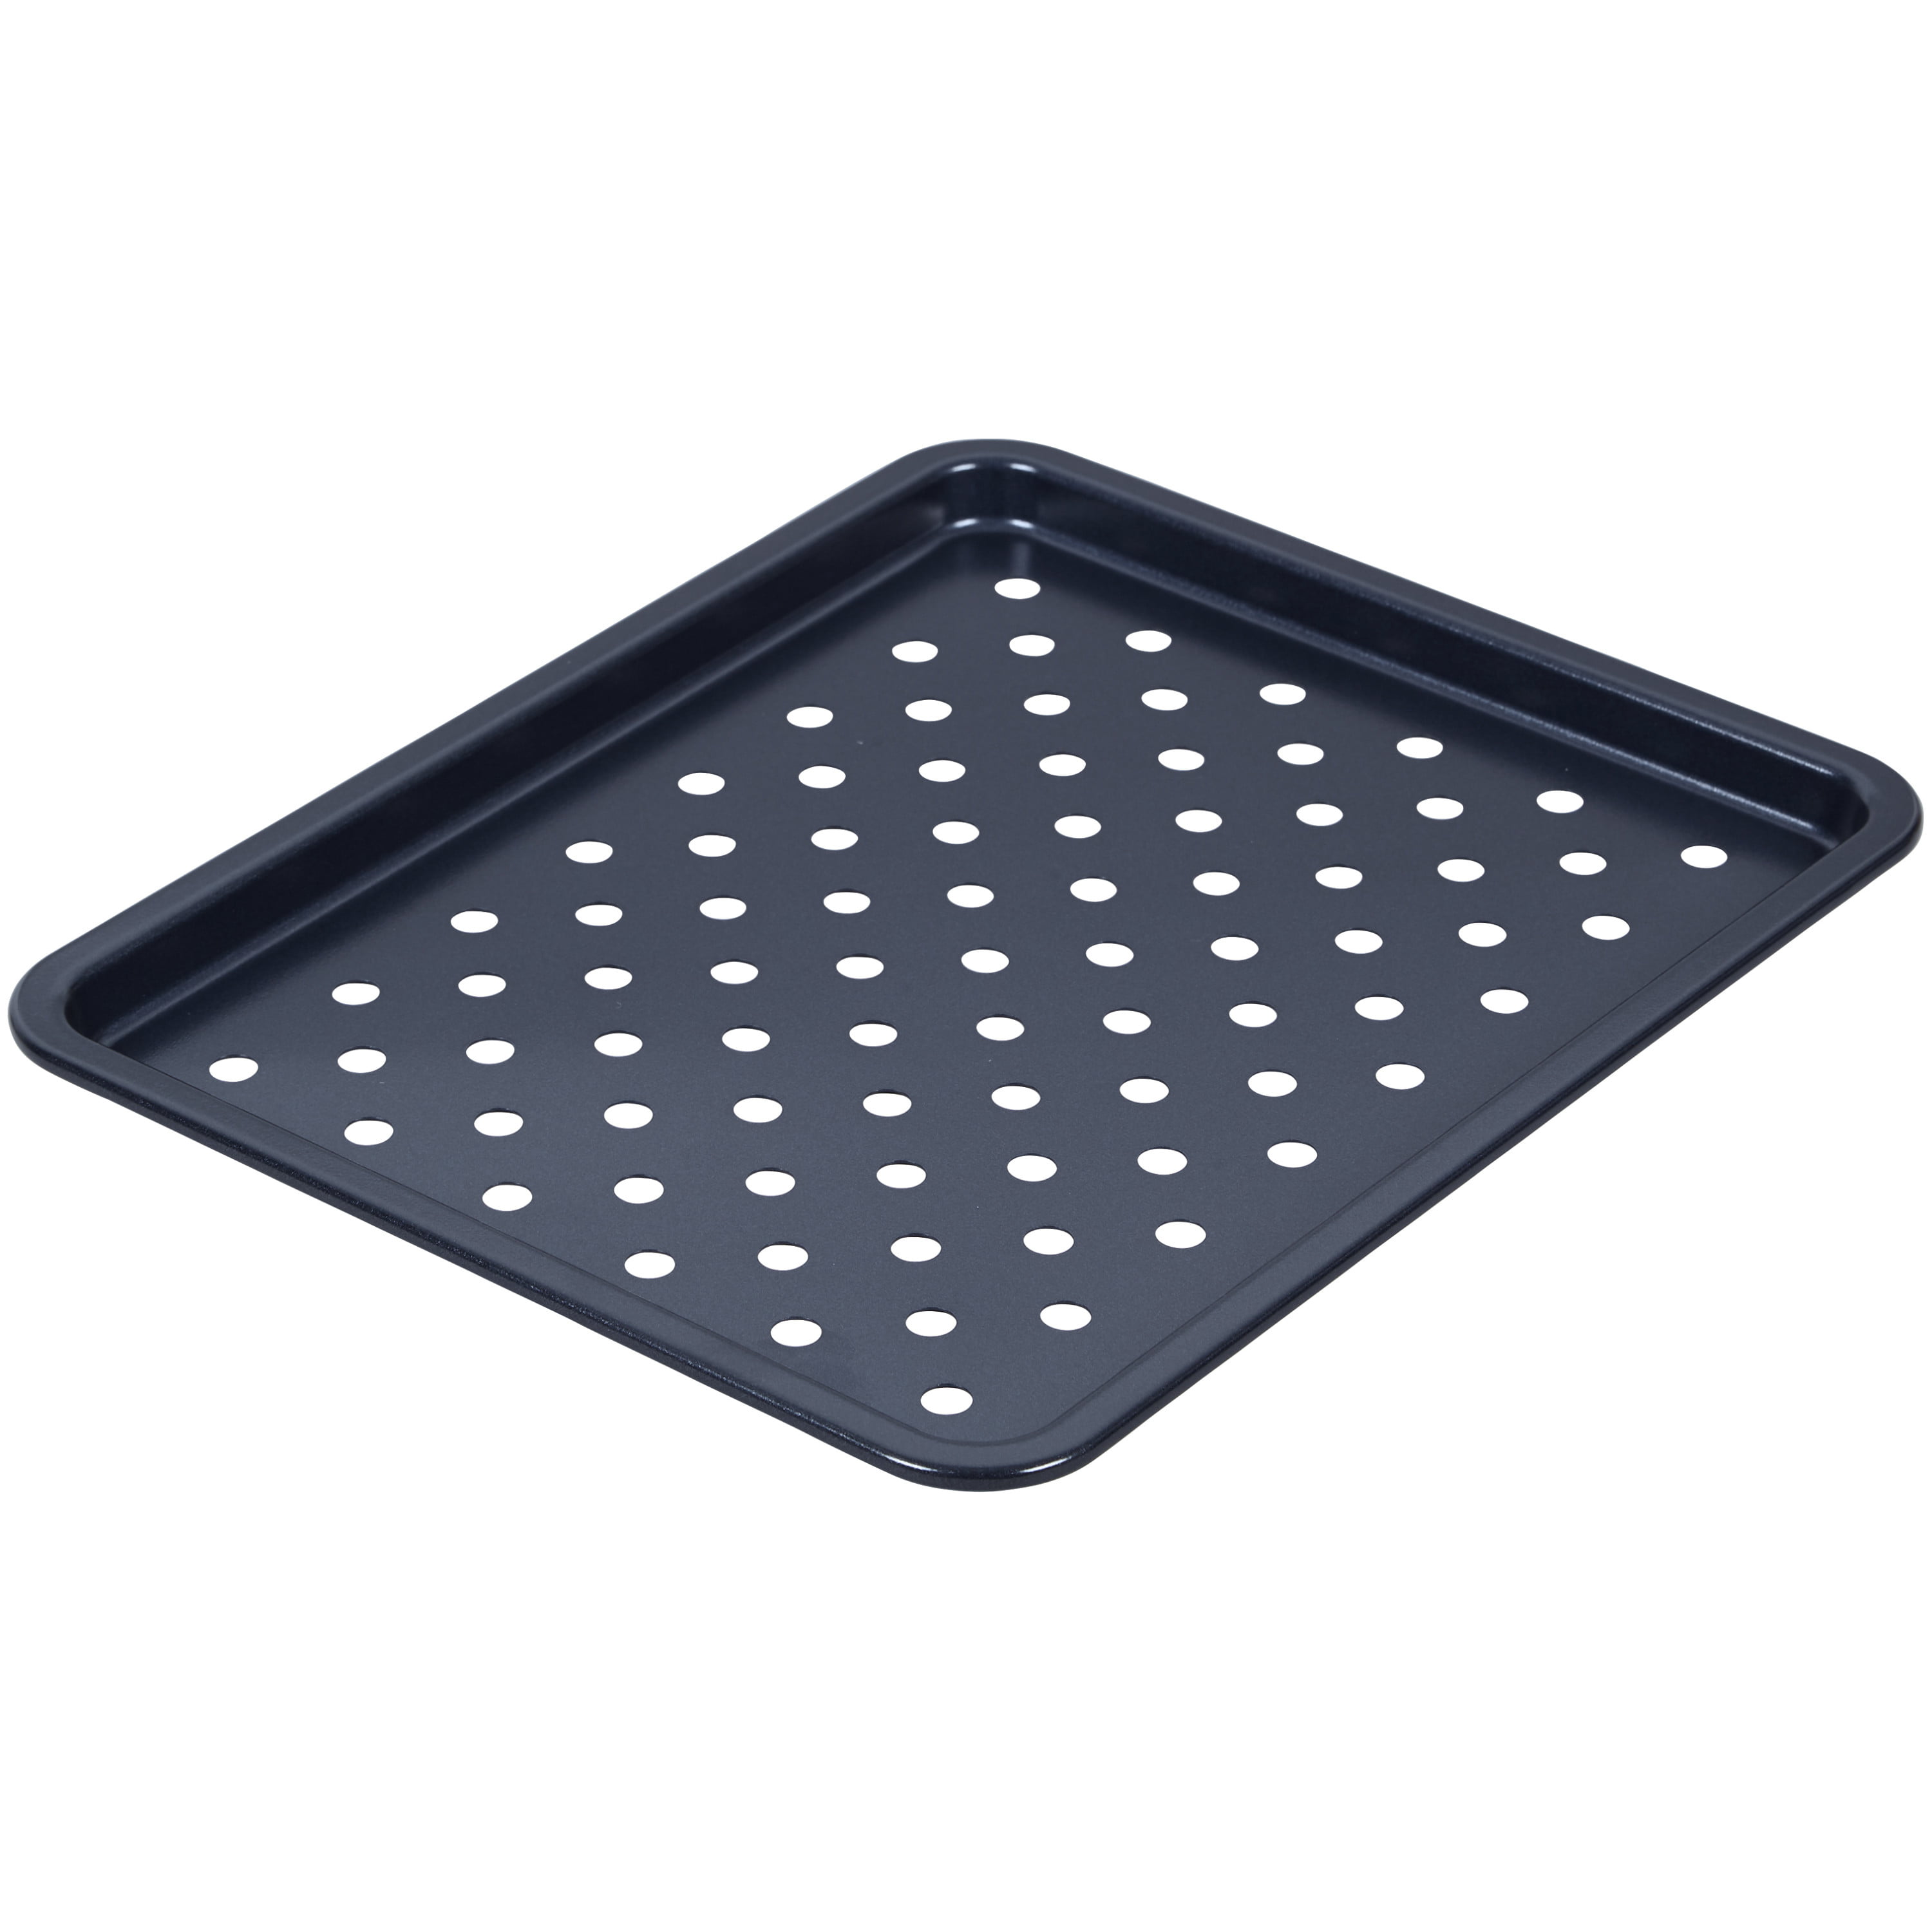 Wilton Non-Stick Diamond-Infused Navy Blue Oblong Baking Pan with Cover, 9  x 13-inch